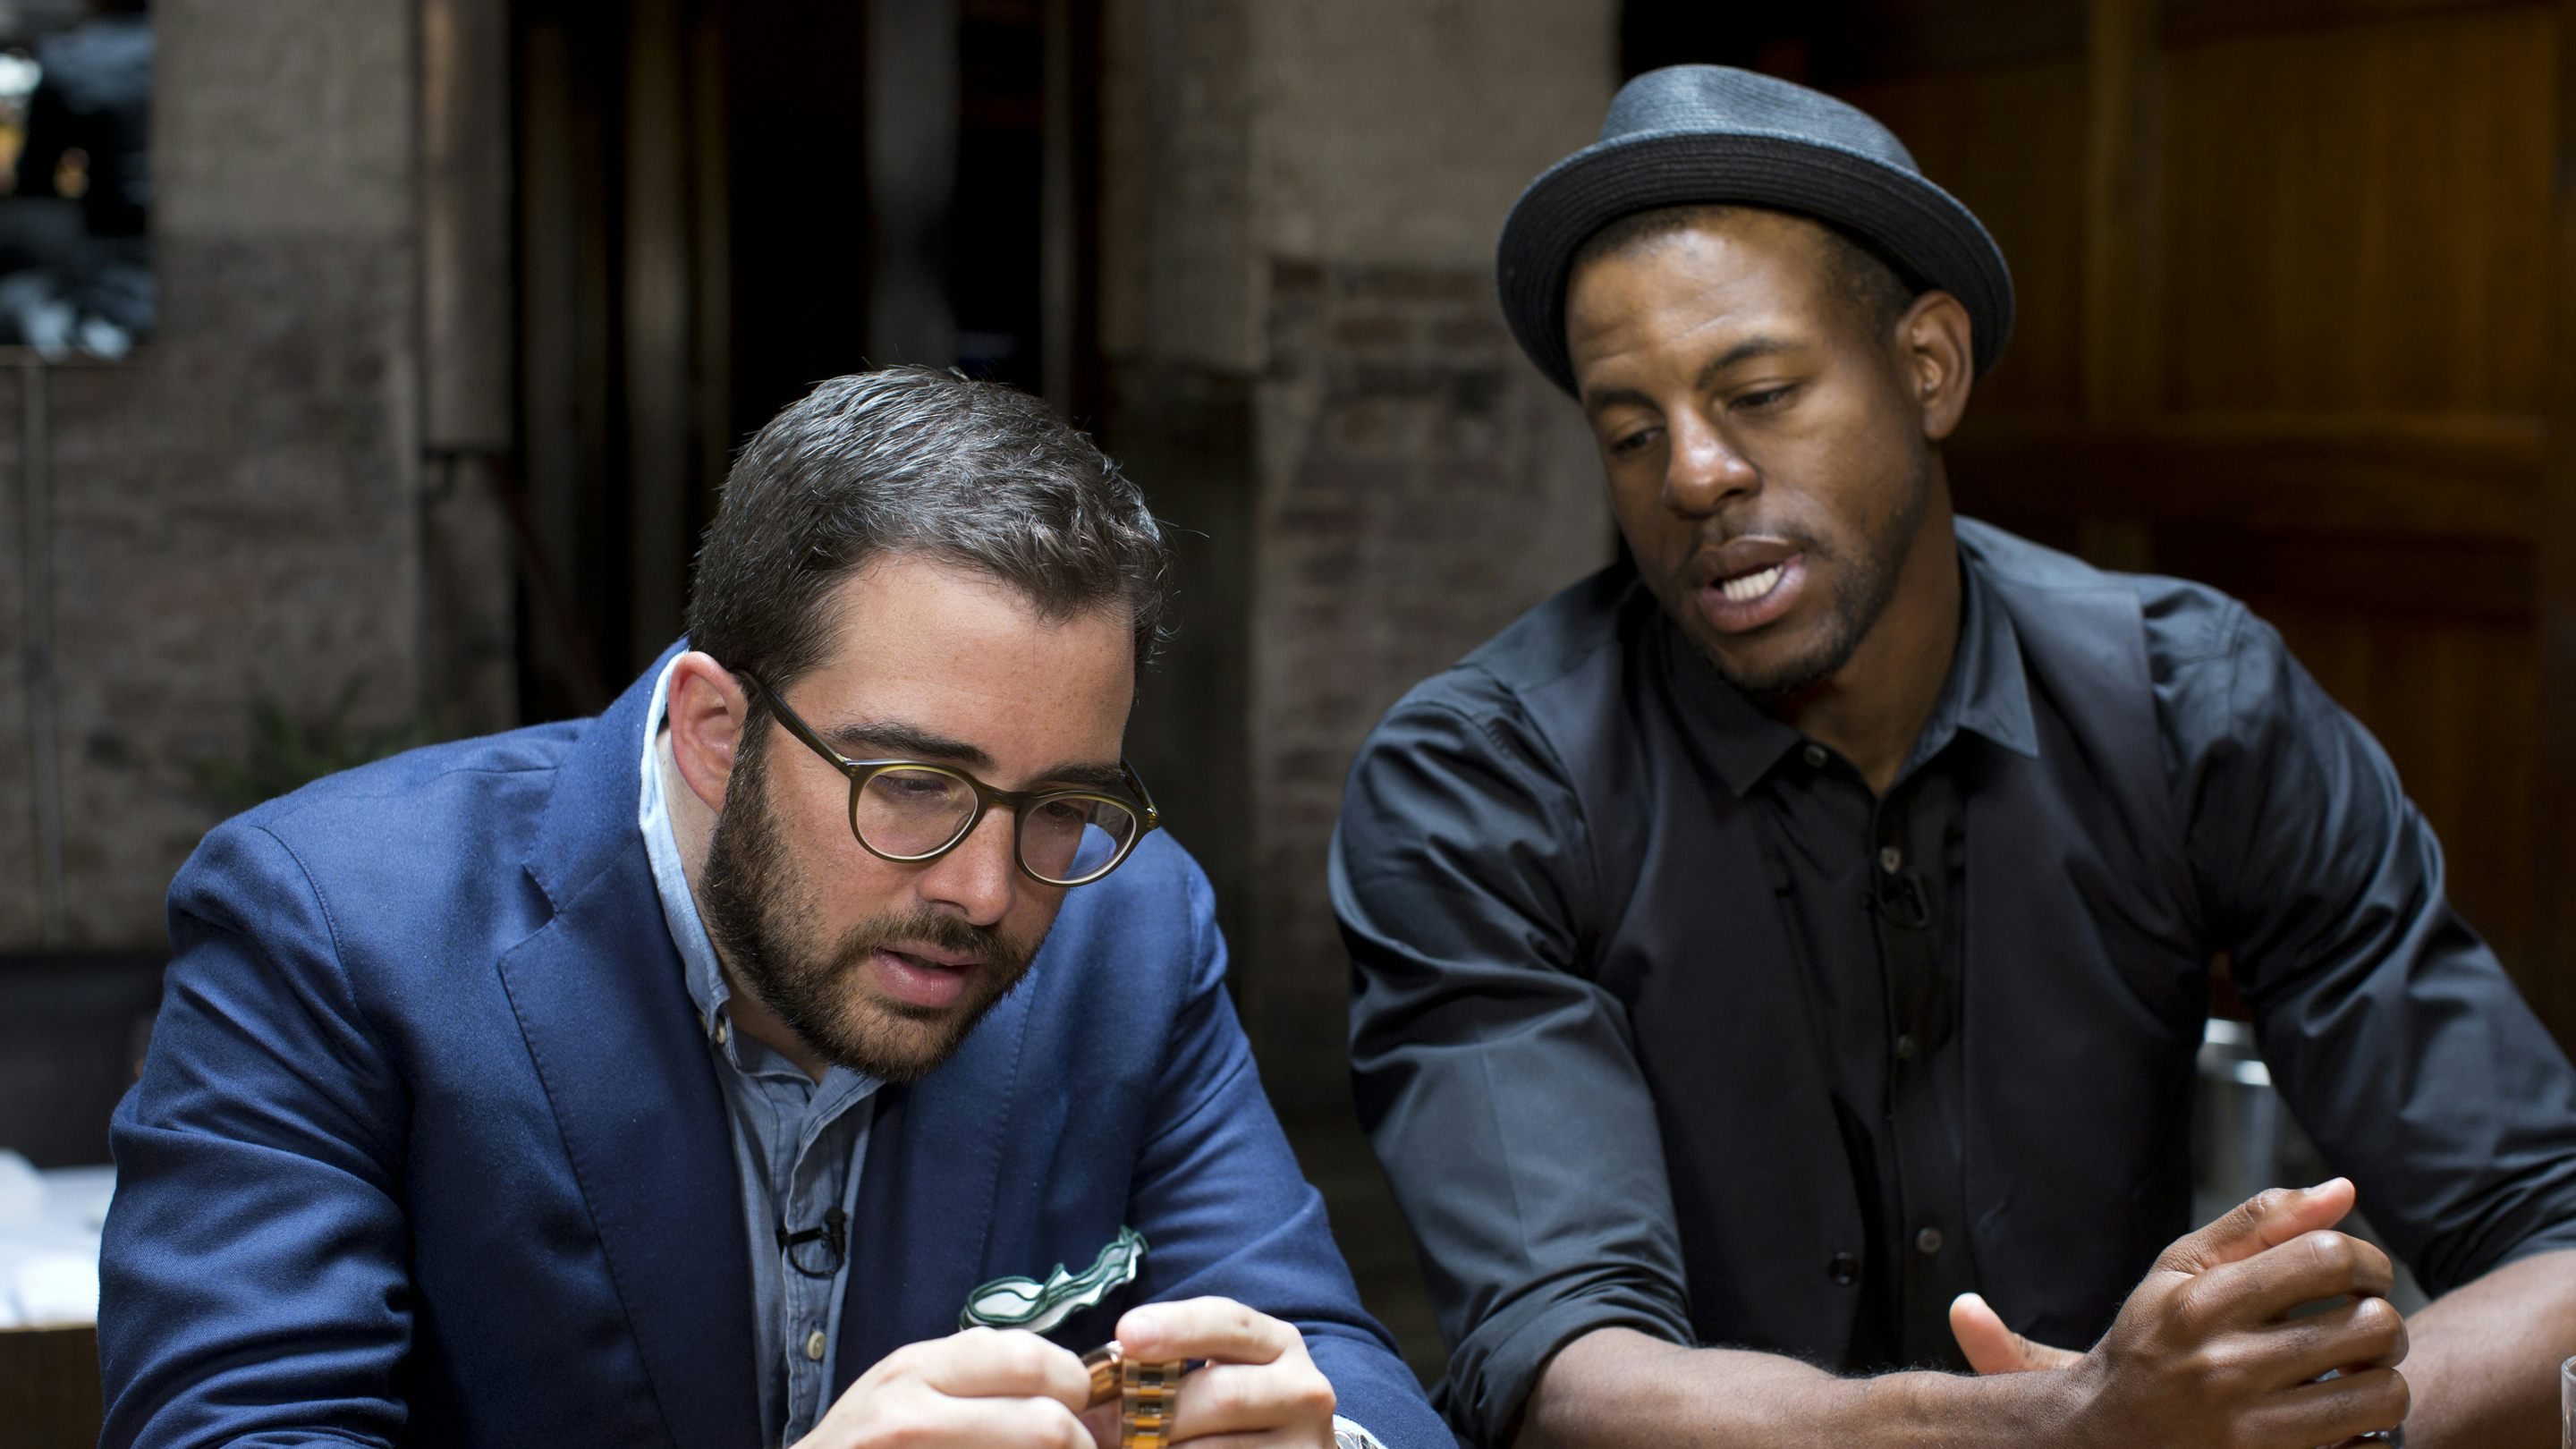 NBA Star Andre Iguodala on Style and Watches, Watches